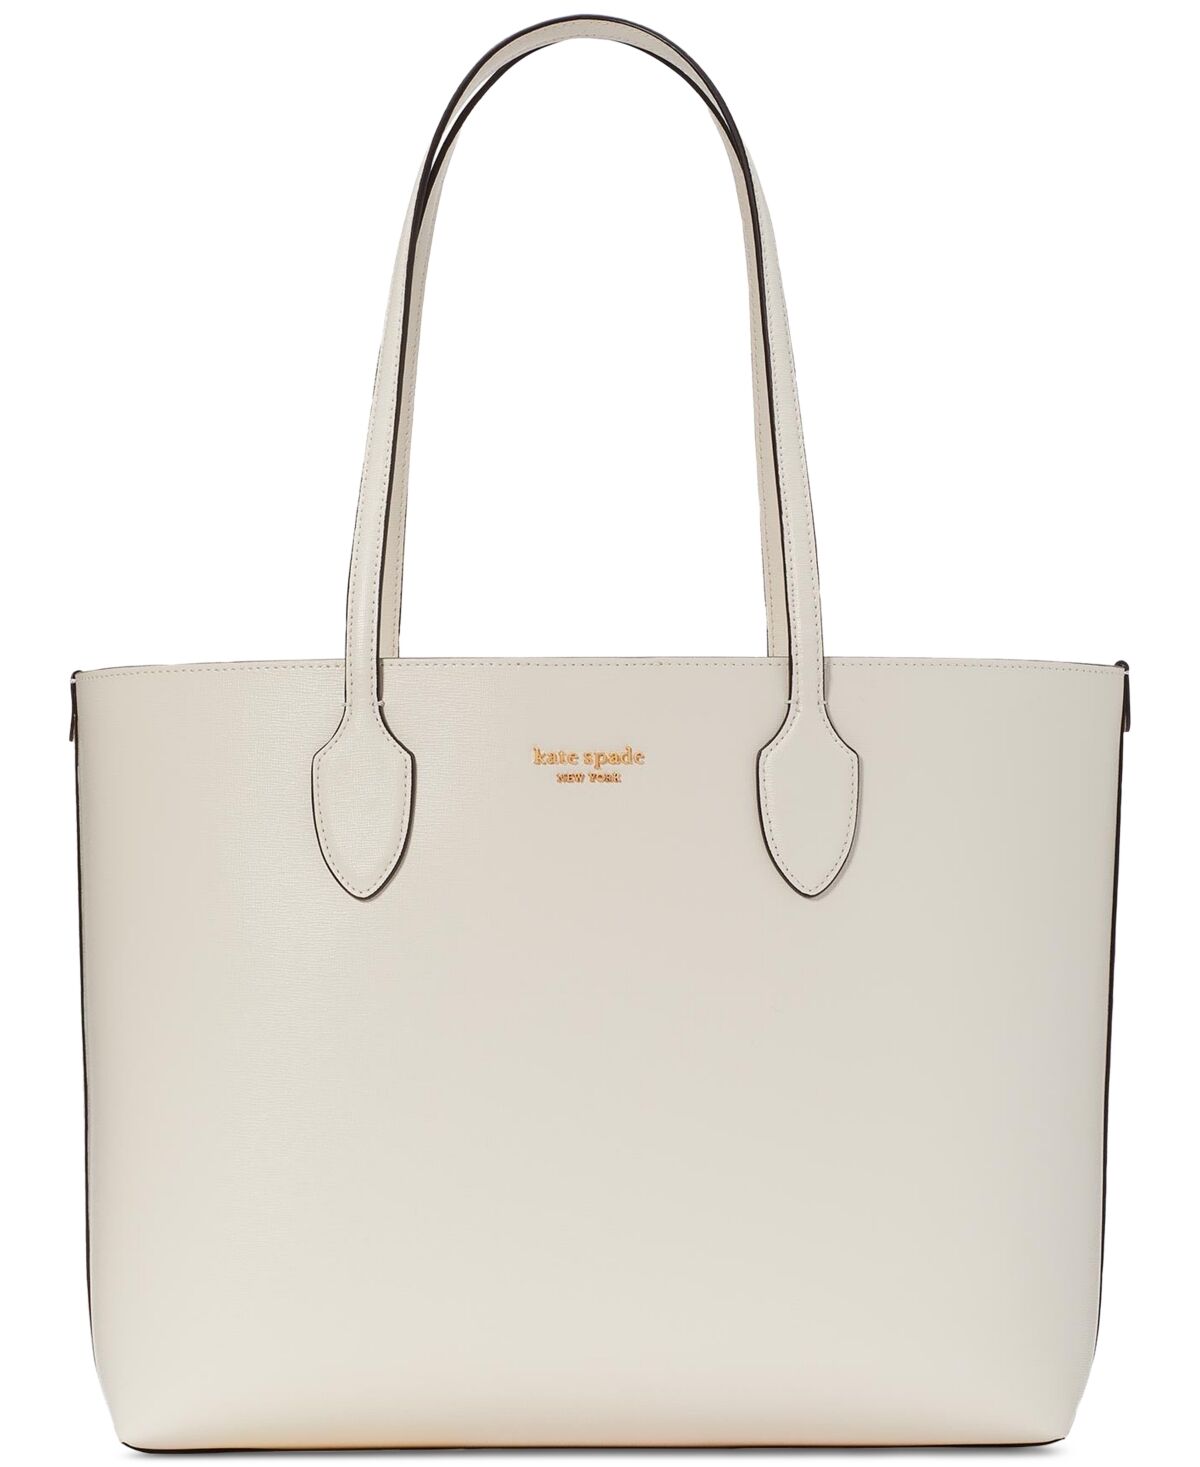 kate spade new york Bleecker Saffiano Leather Large Tote - Cream.